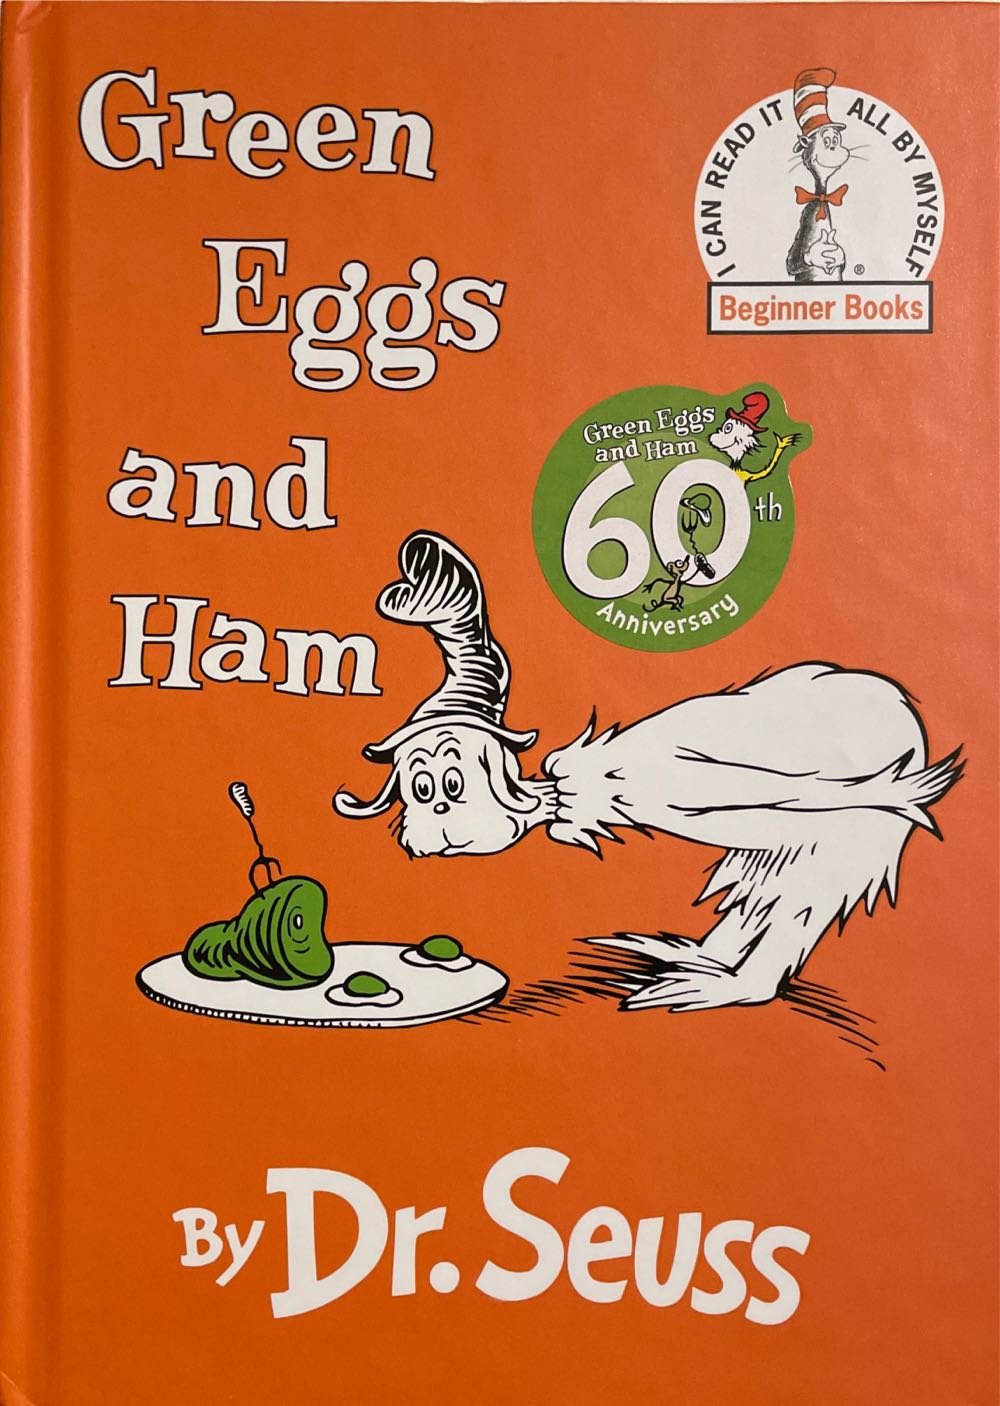 Green Eggs and Ham - Dr. Seuss (Random House Books for Young Readers - Hardcover) book collectible [Barcode 9780394800165] - Main Image 3